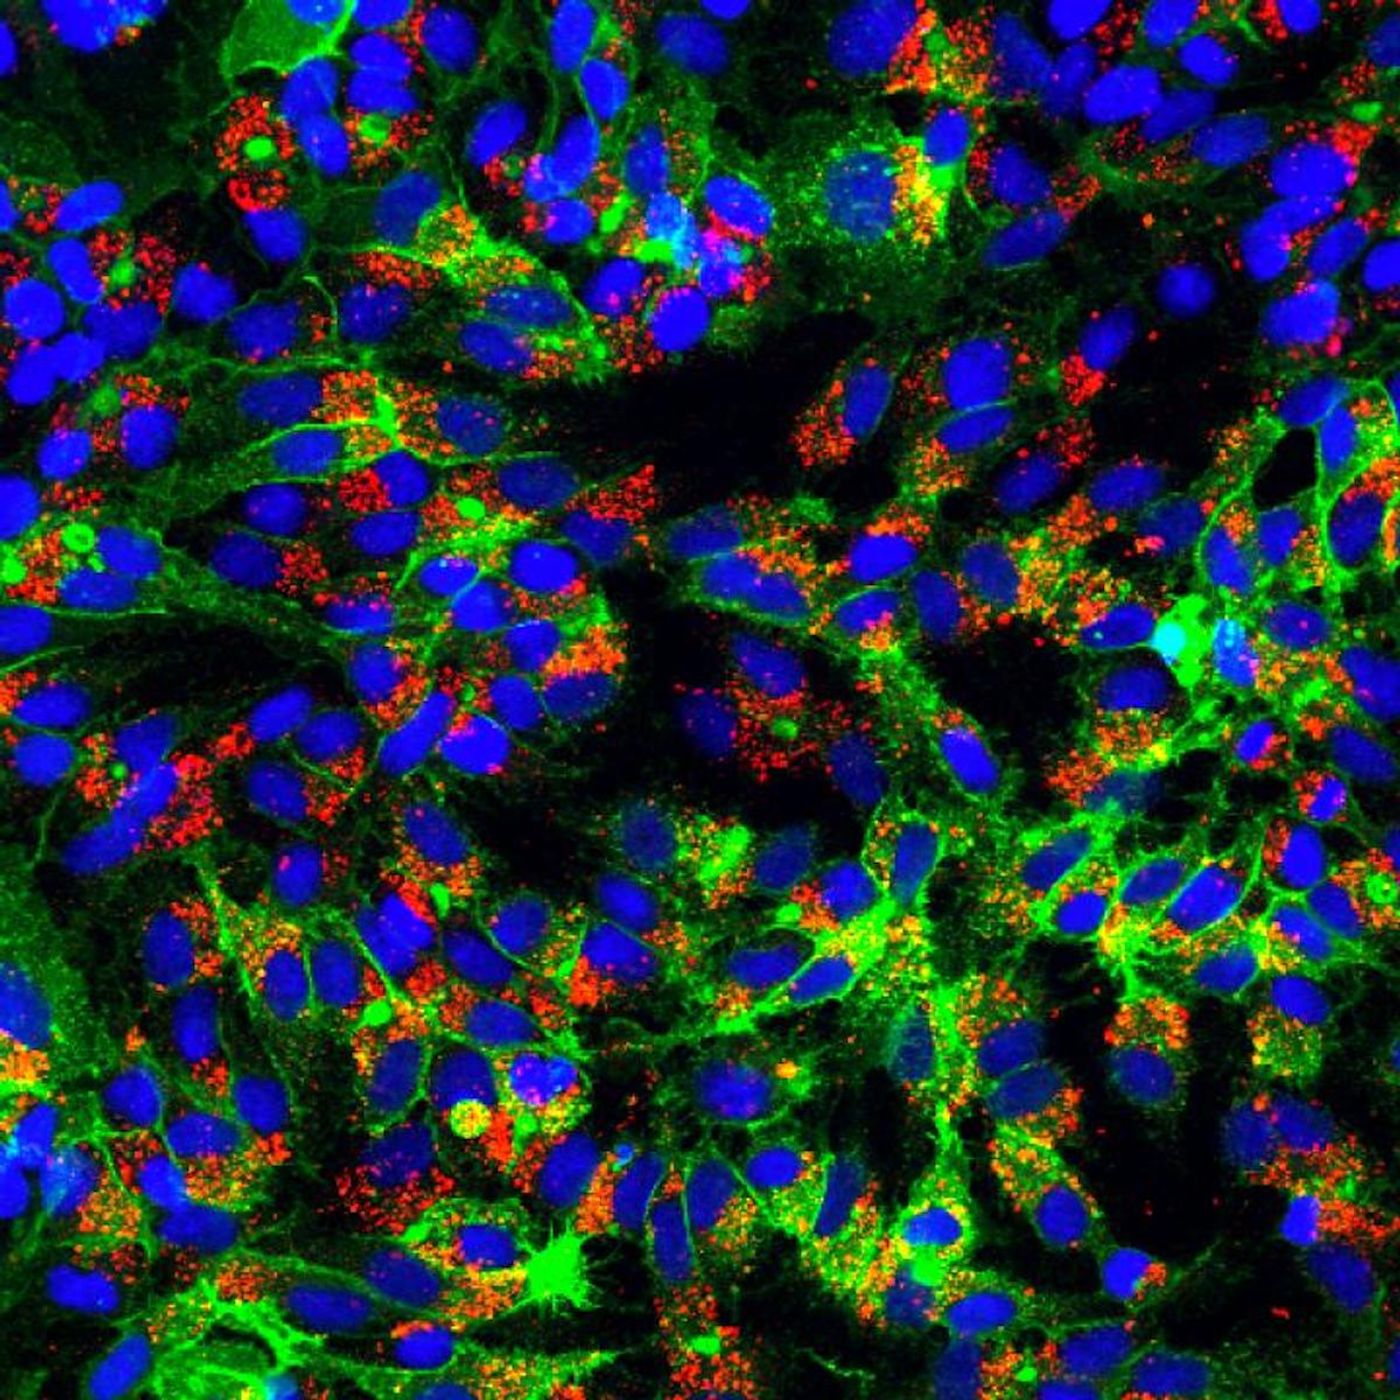 Human liver cell lines (green, with blue nuclei) infected with HBV express an HBV protein (in red) in this image captured by immunofluorescence microscopy. / Credit: Image by Stephanie Maya, Princeton University